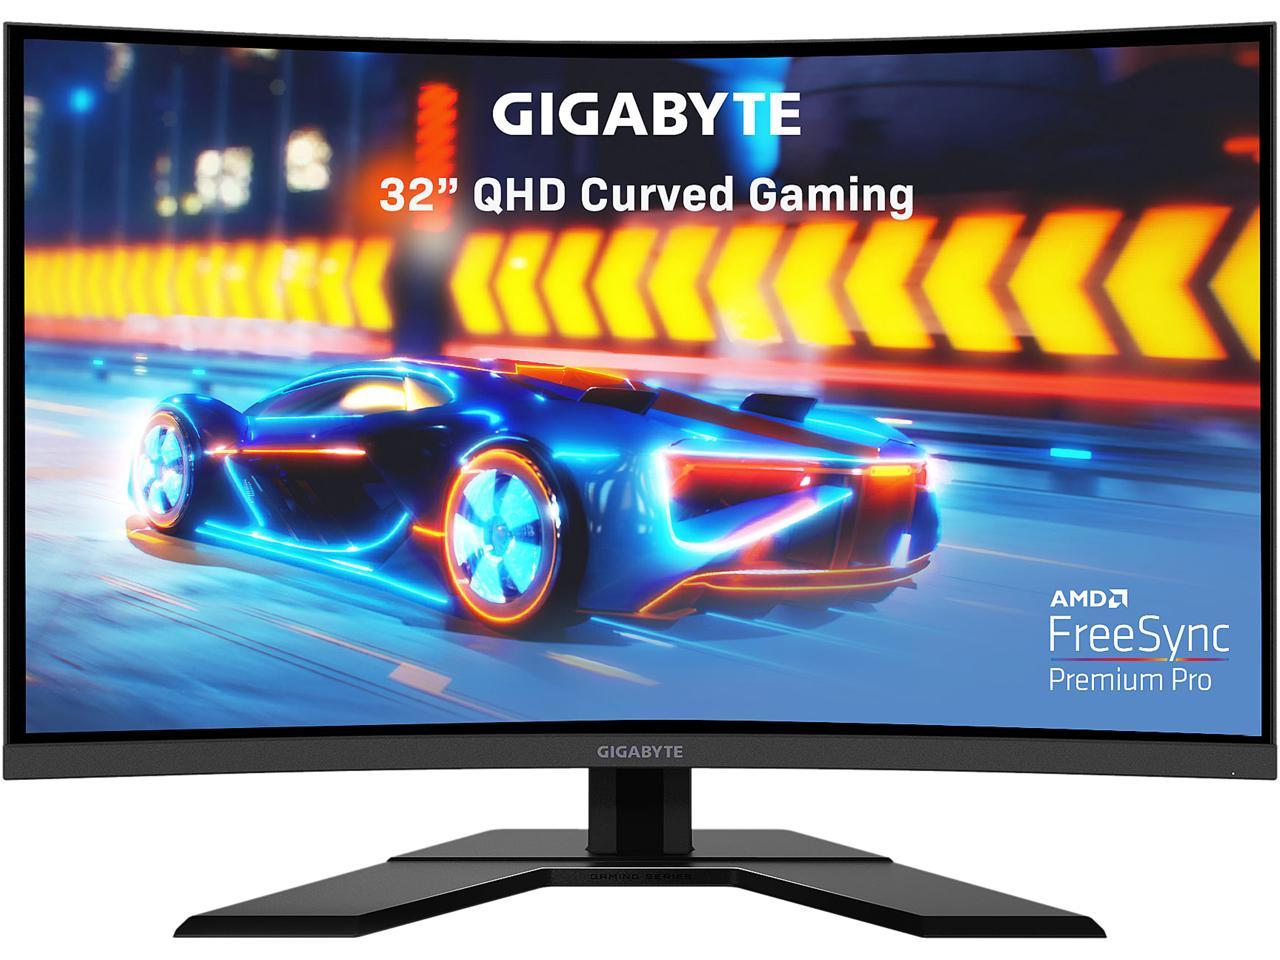 Gigabyte G32QC A 32" Curved QHD 165Hz 1ms FreeSync VA Panel Gaming Monitor, 93% DCI-P3, HDR400 + Outriders Game @ $280 + F/S at Newegg